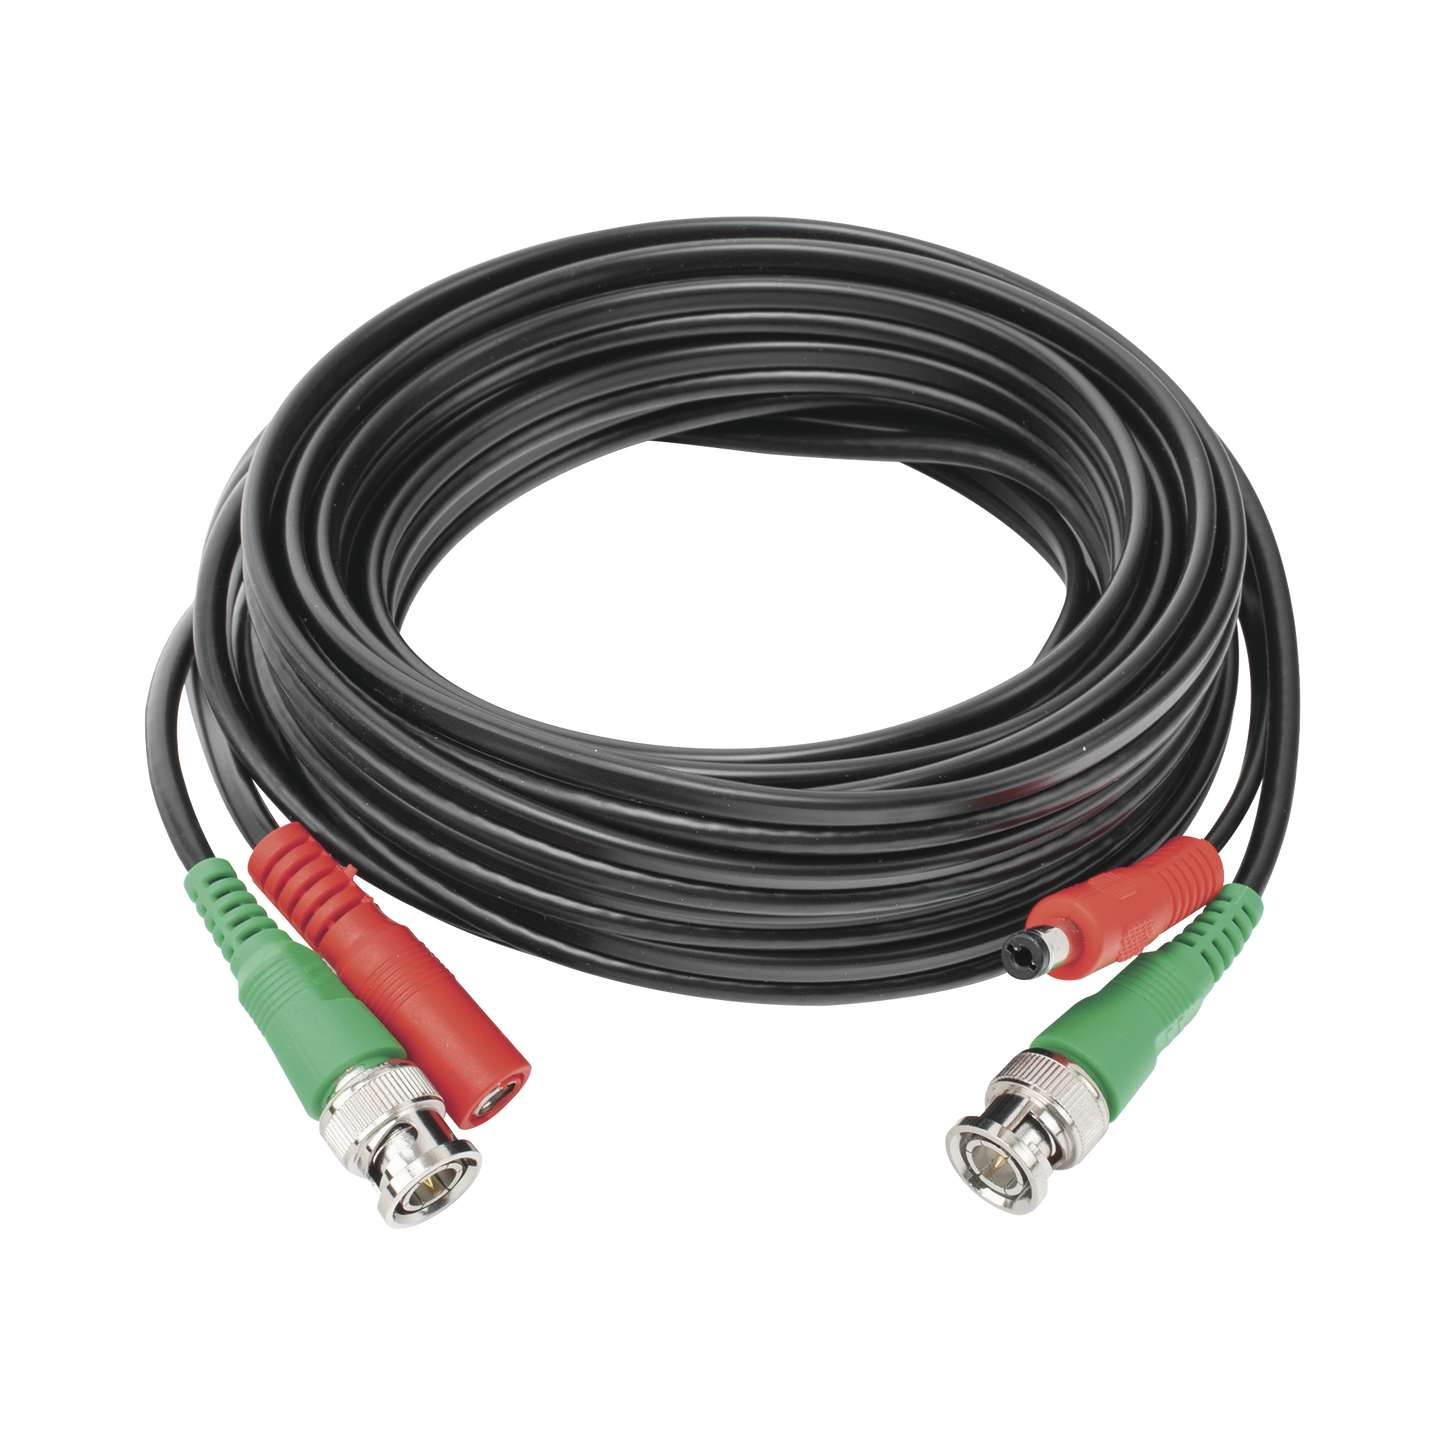 5 meters / Coaxial cable ( BNC ) + Power / 100% Copper / For 4K Cameras / Indoor use